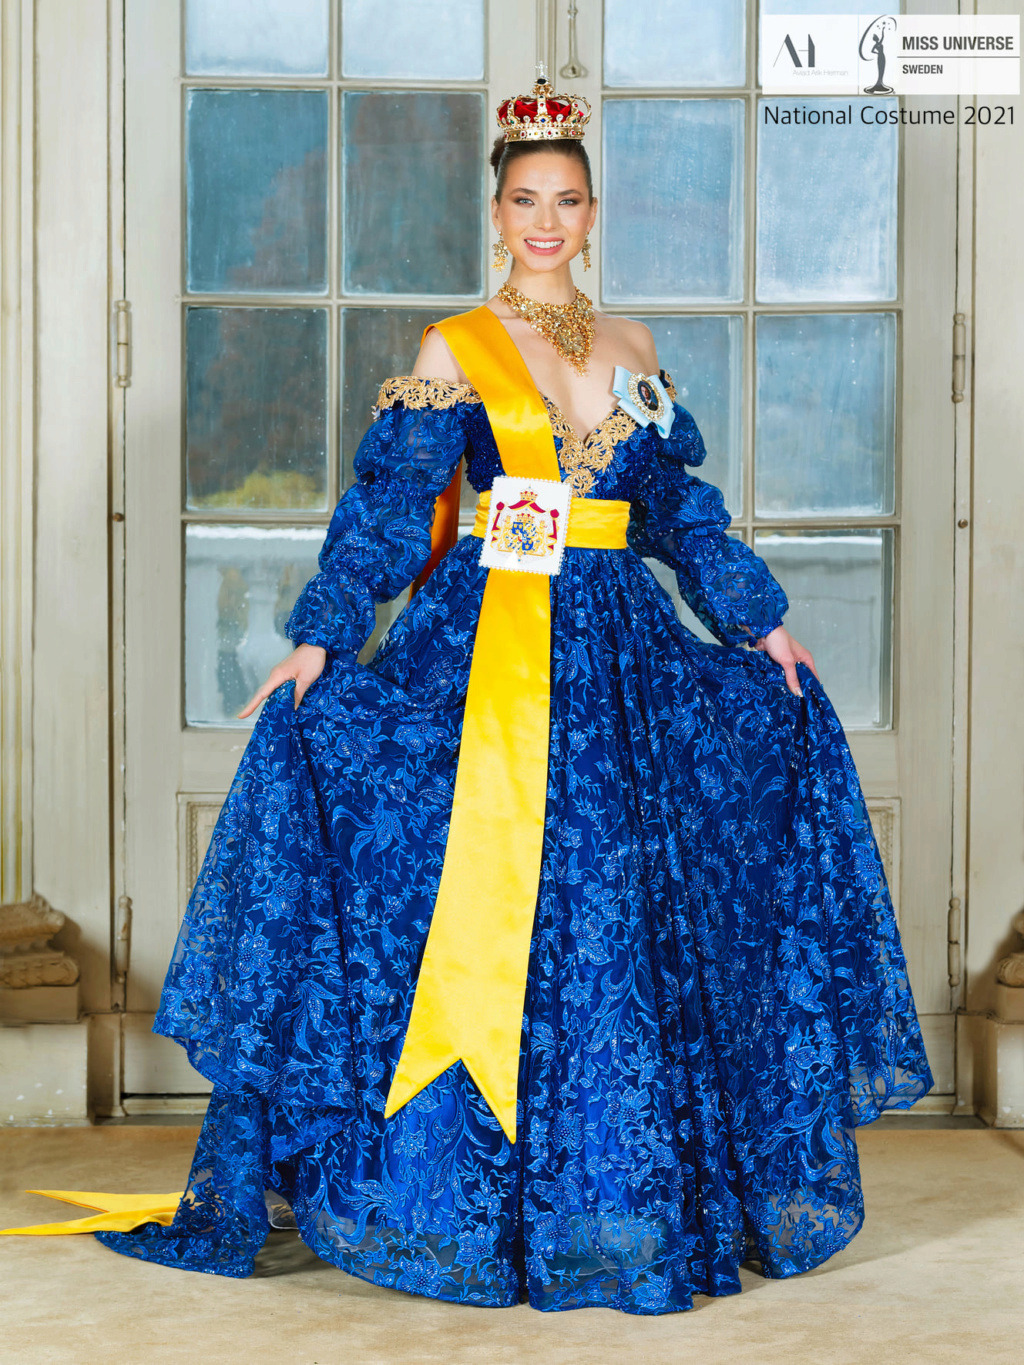 Miss Universe 2021 - NATIONAL COSTUMES 25546011